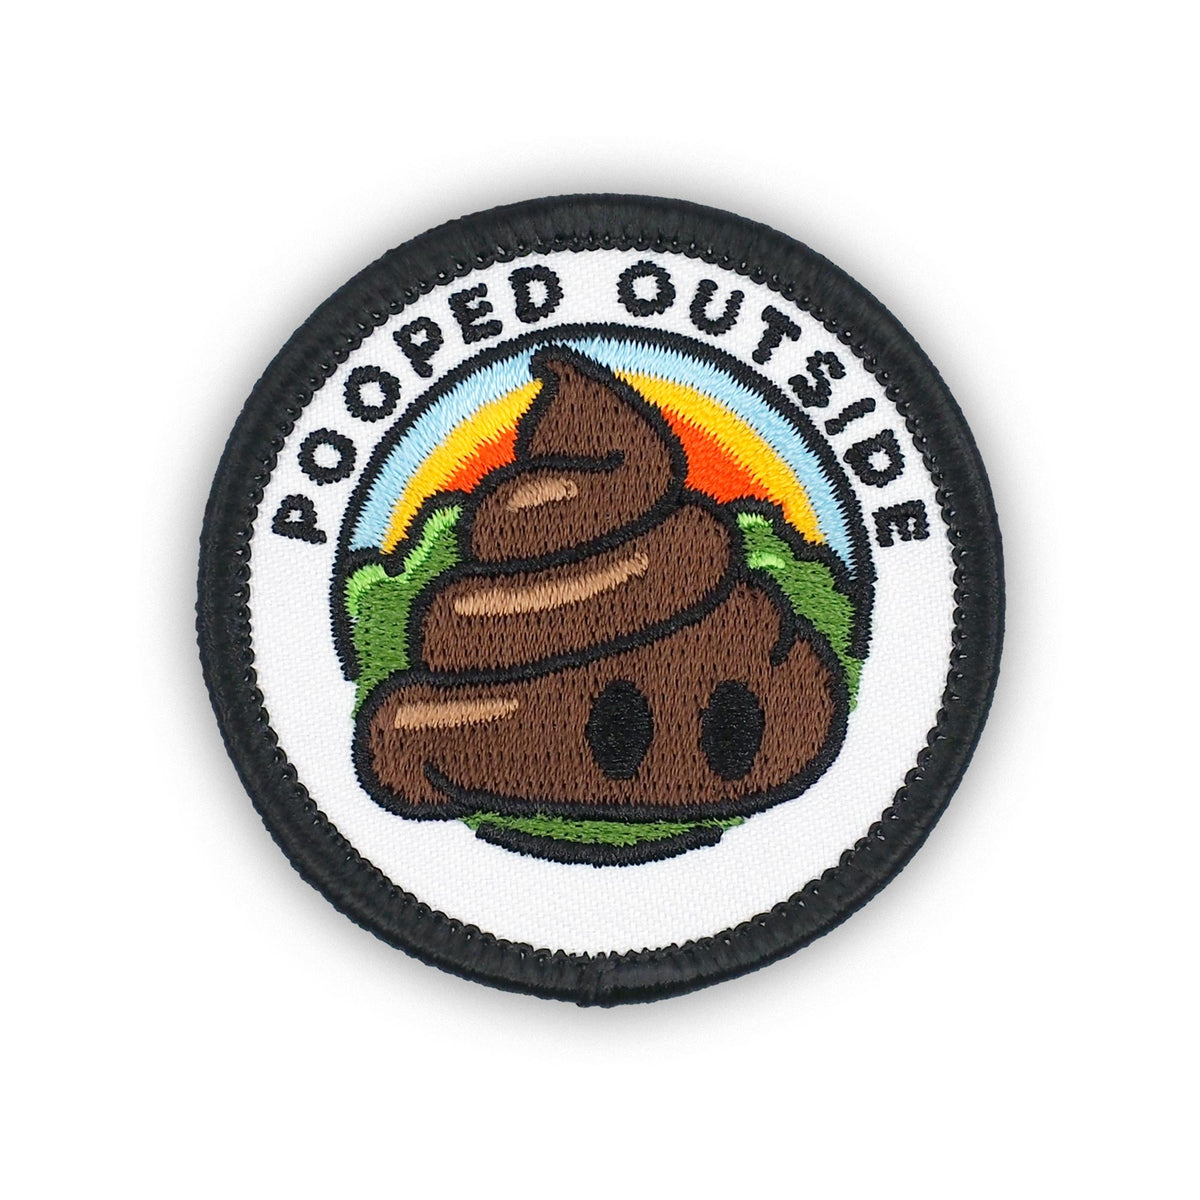 Pooped Outside individual adulting merit badge patch for adults